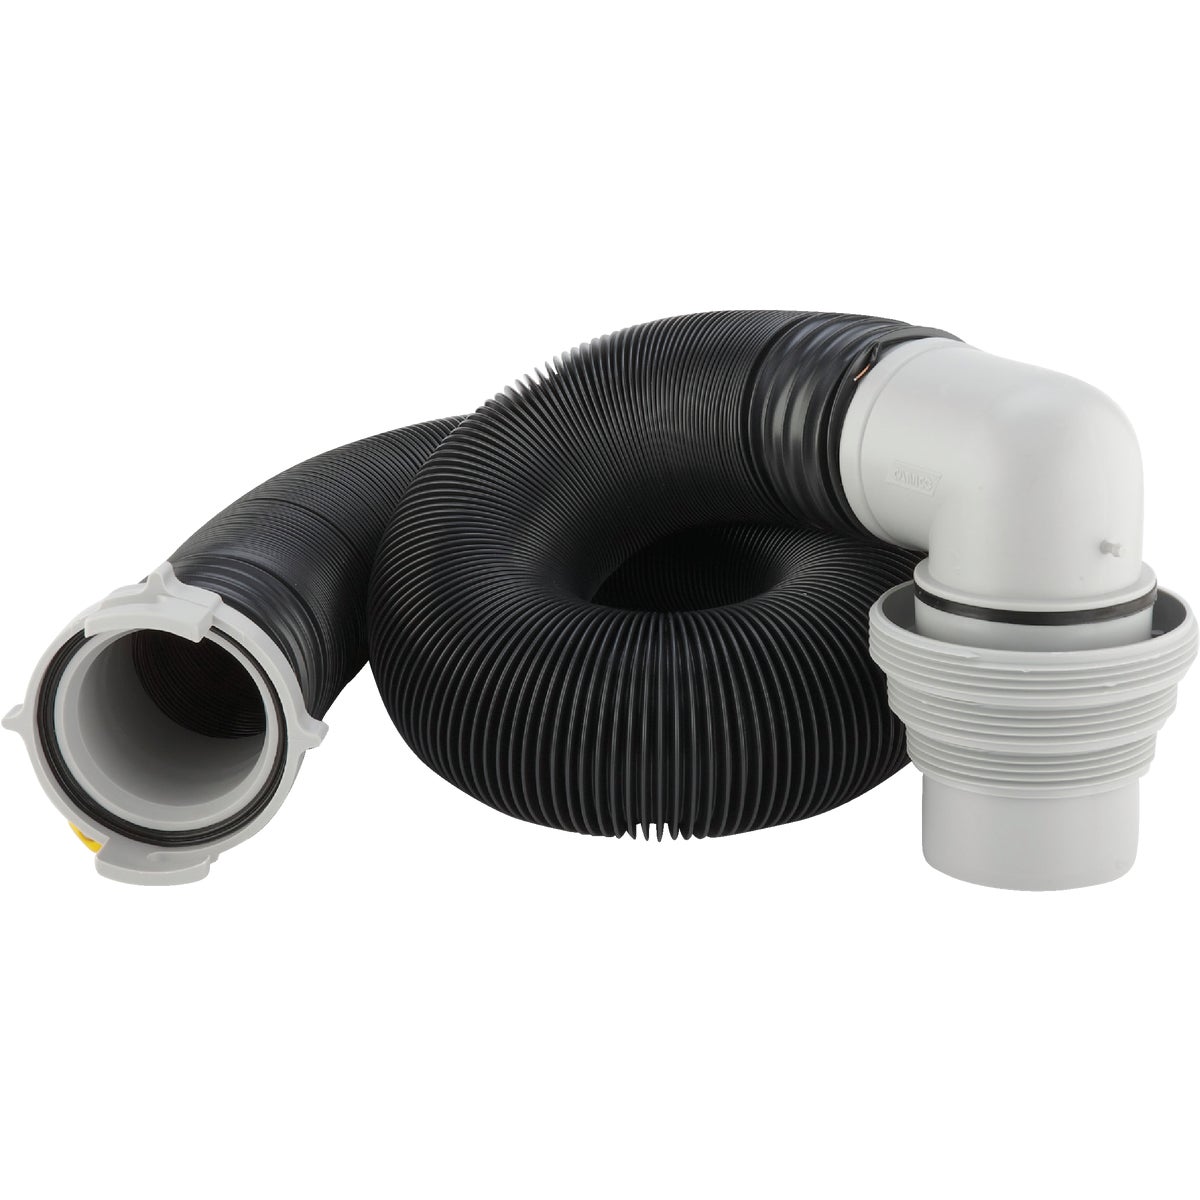 Item 576772, Complete sewer kit comes assembled with everything needed for a quick, 